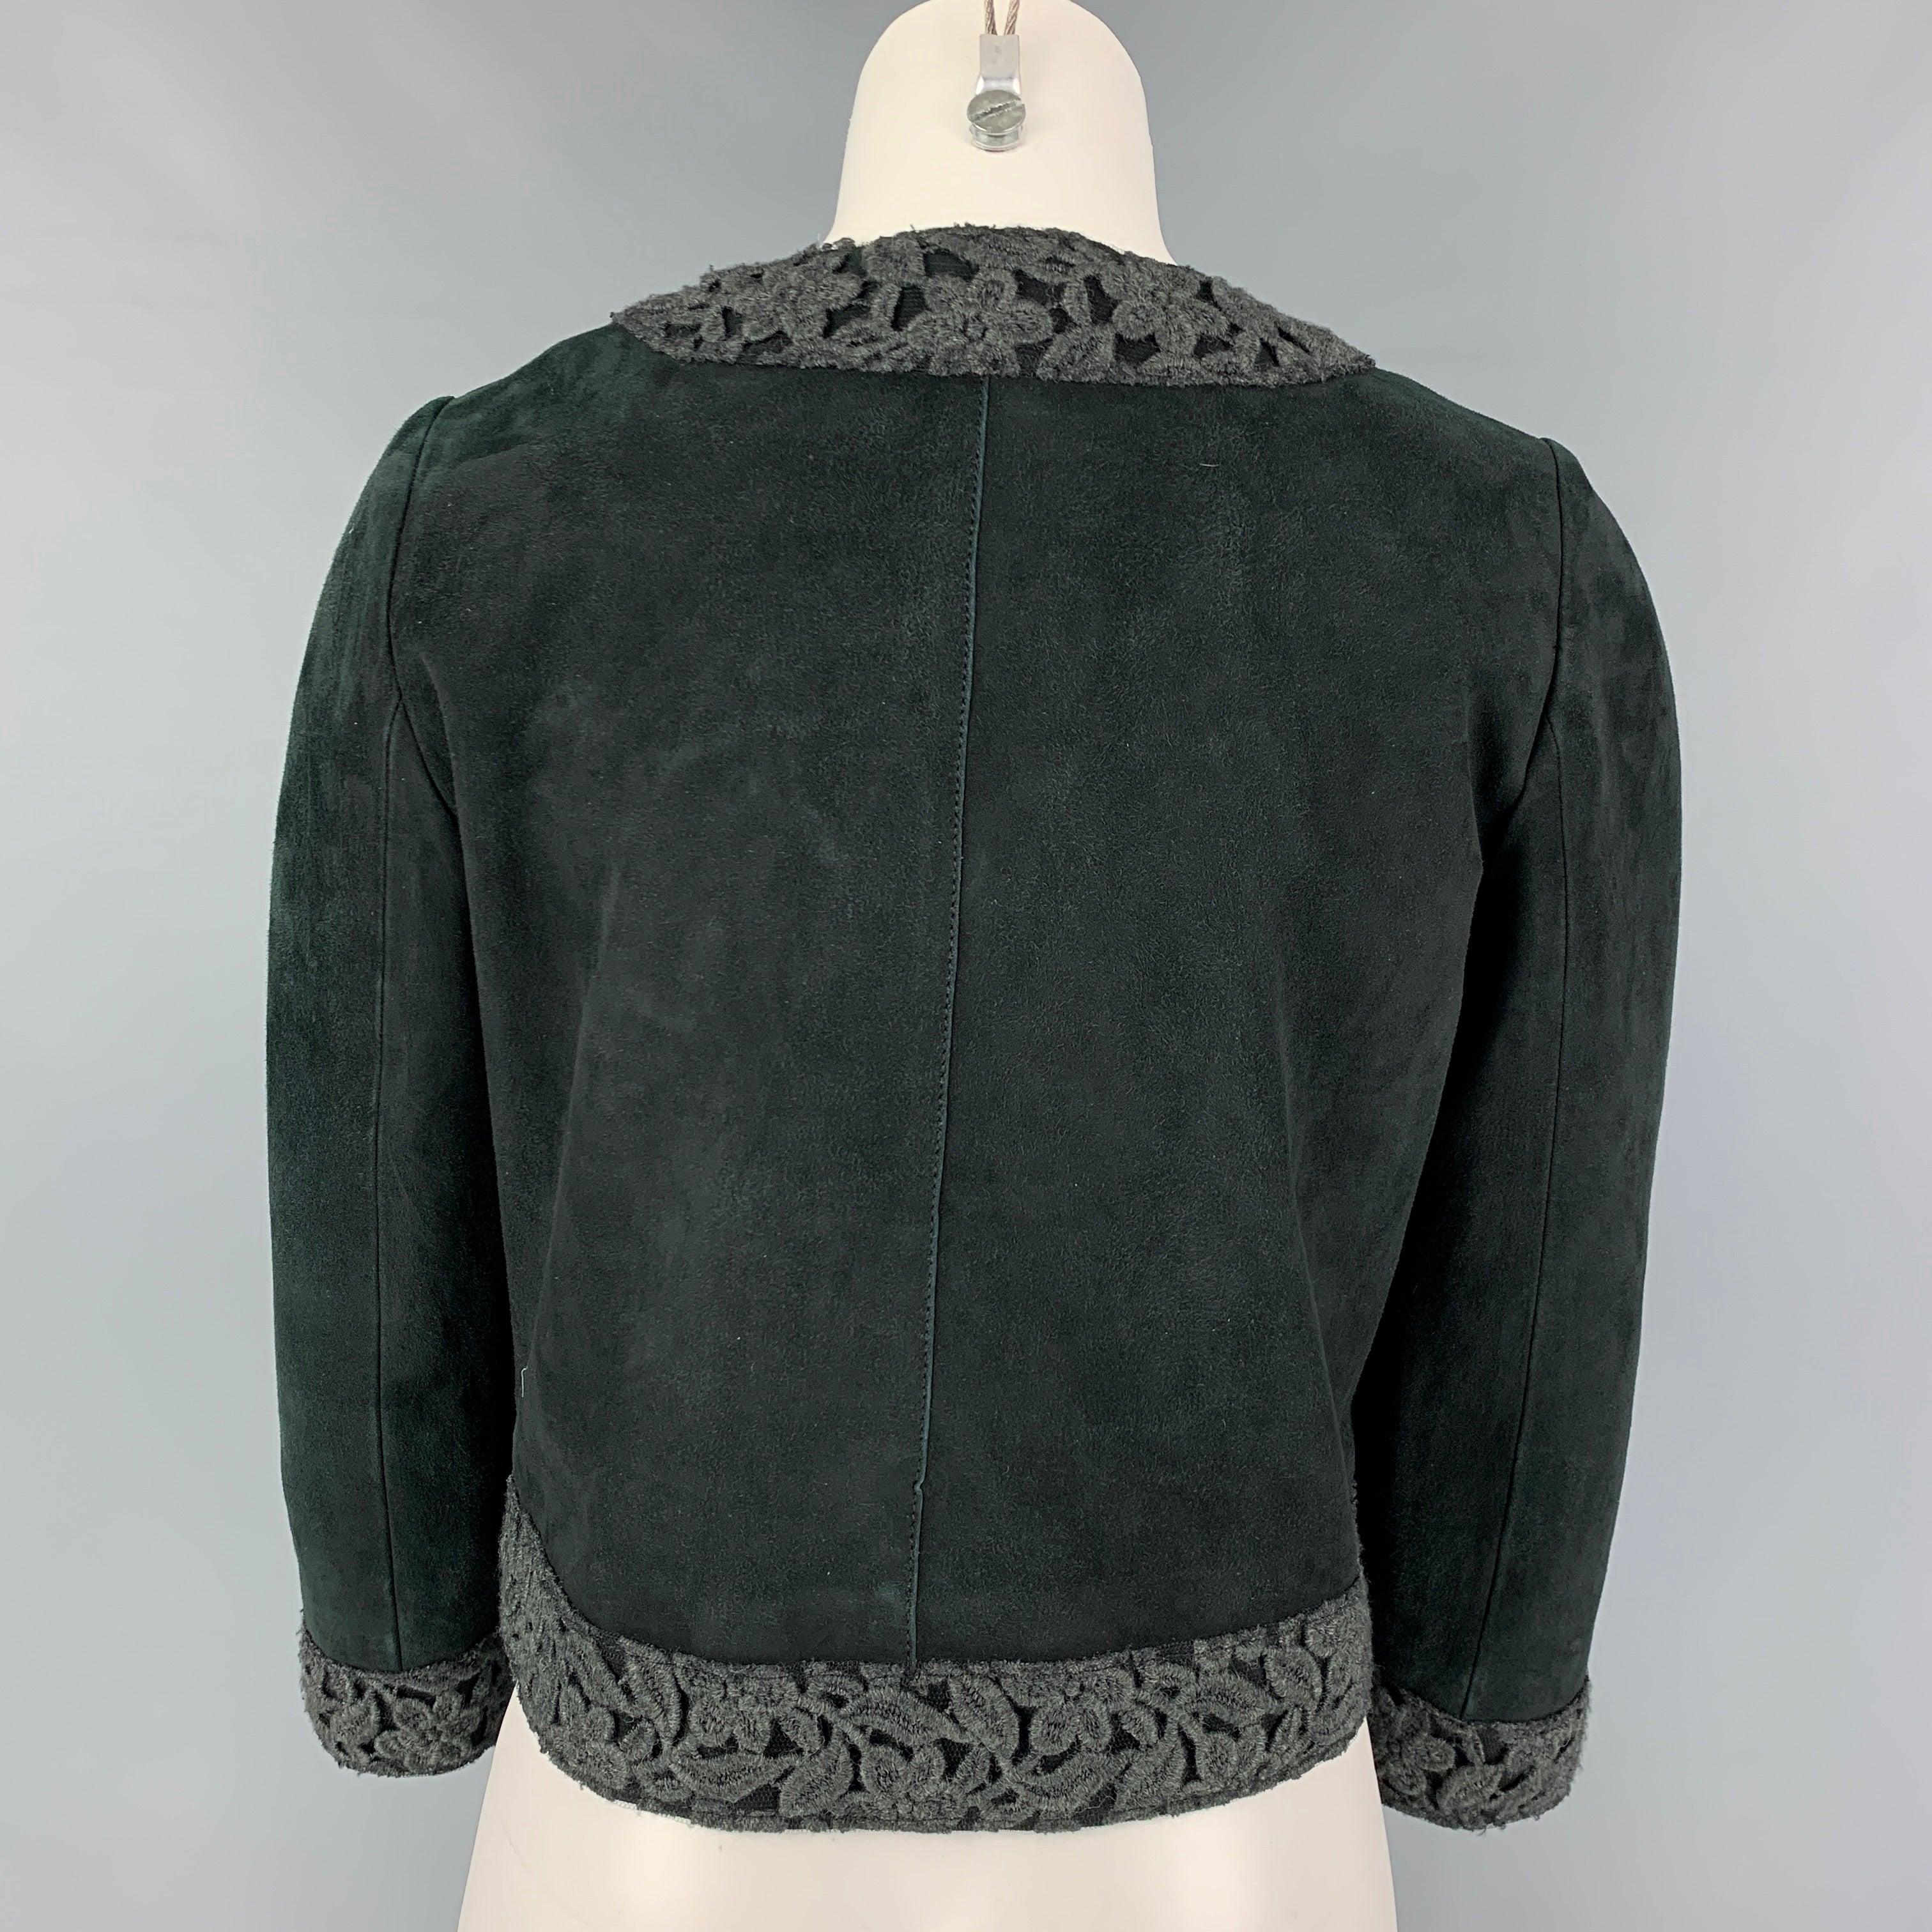 DOLCE & GABBANA Size 8 Dark Green Suede Mixed Patterns Jacket In Good Condition For Sale In San Francisco, CA